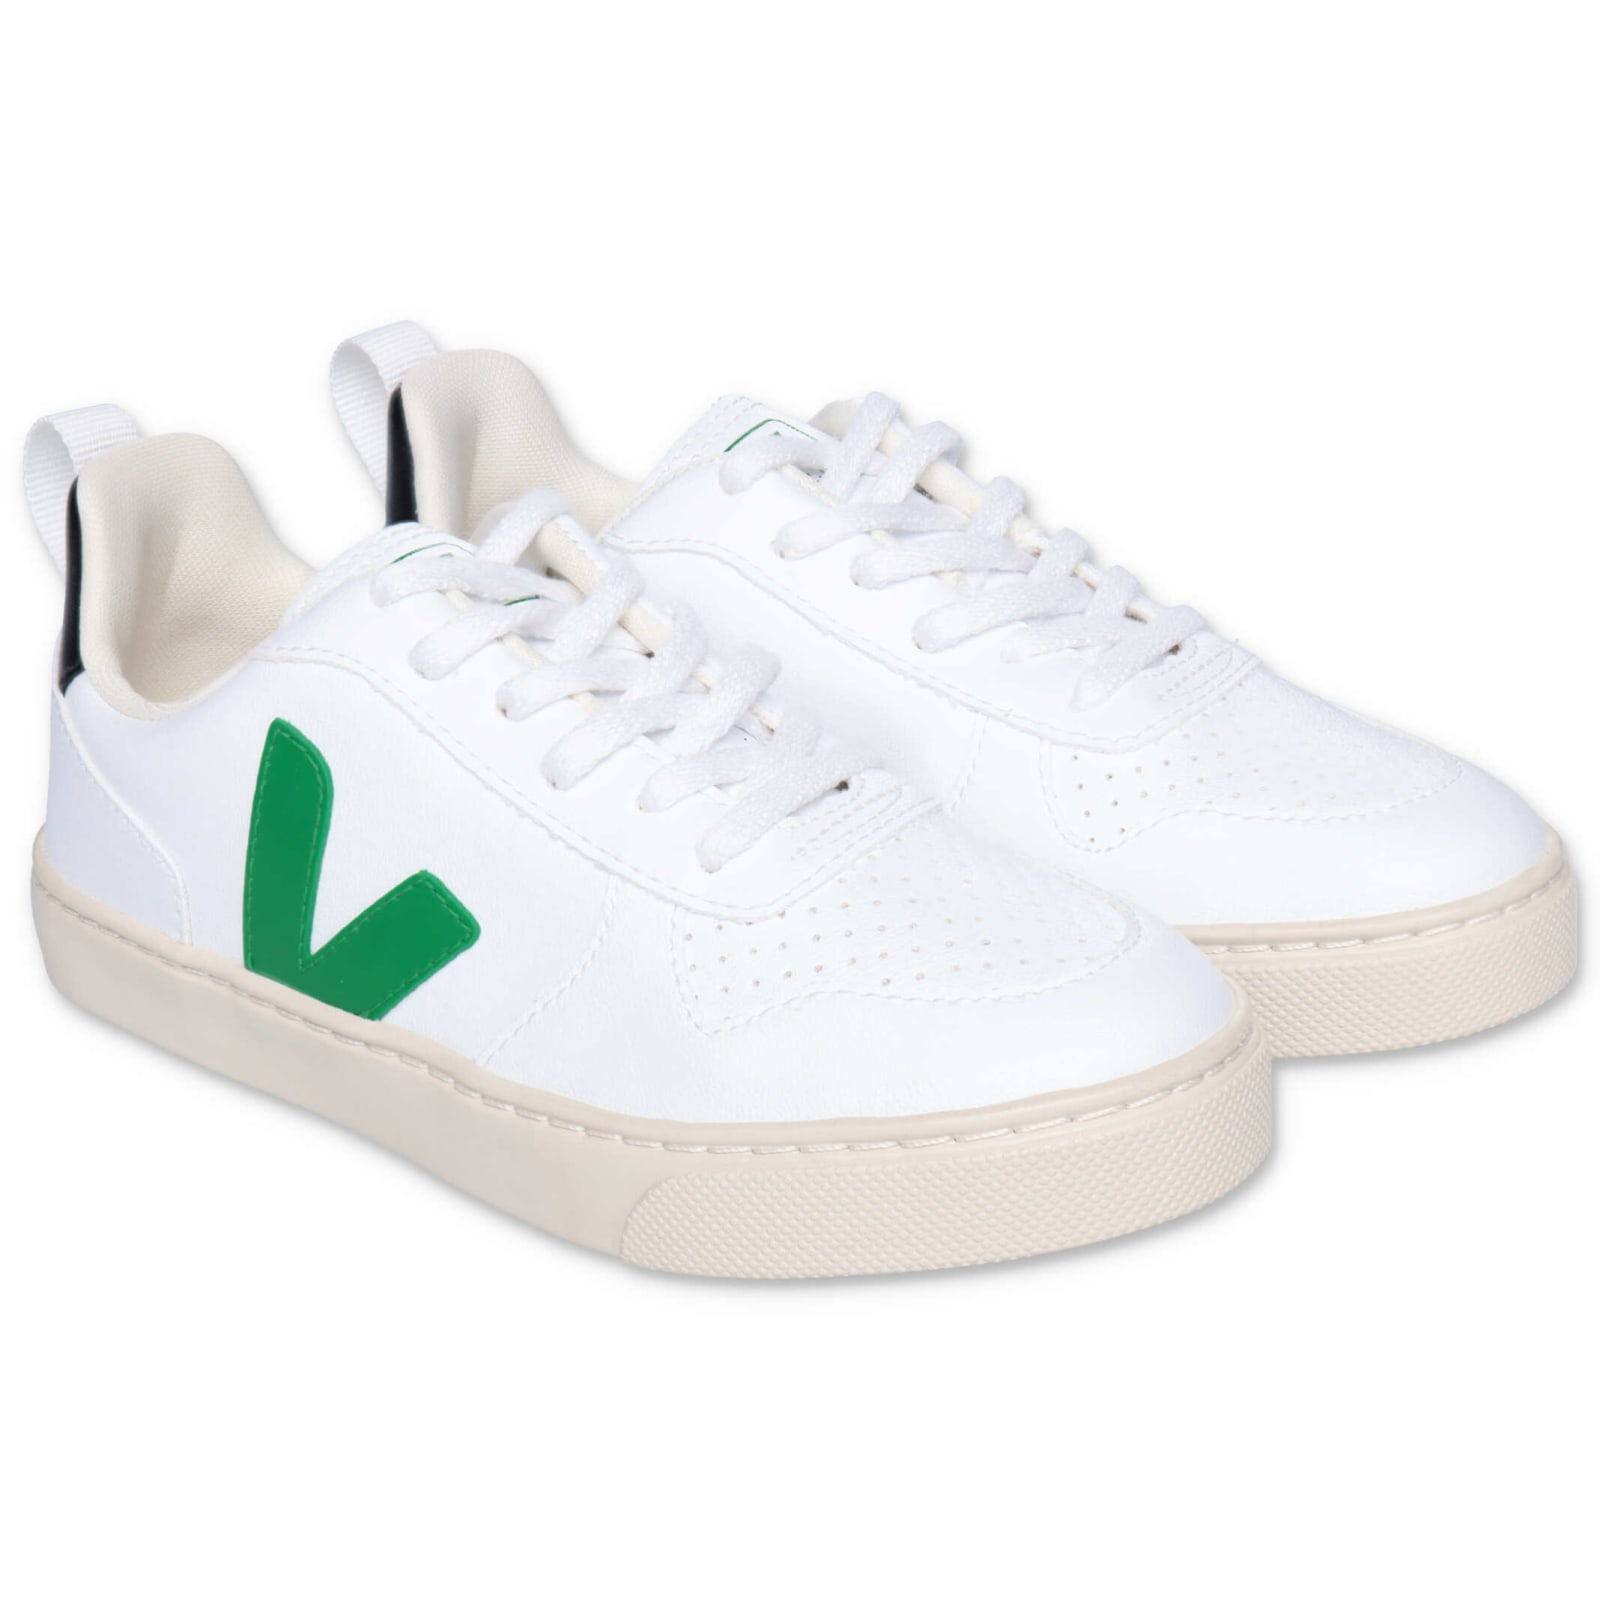 Veja Sneakers Bianche In Similpelle Con Lacci